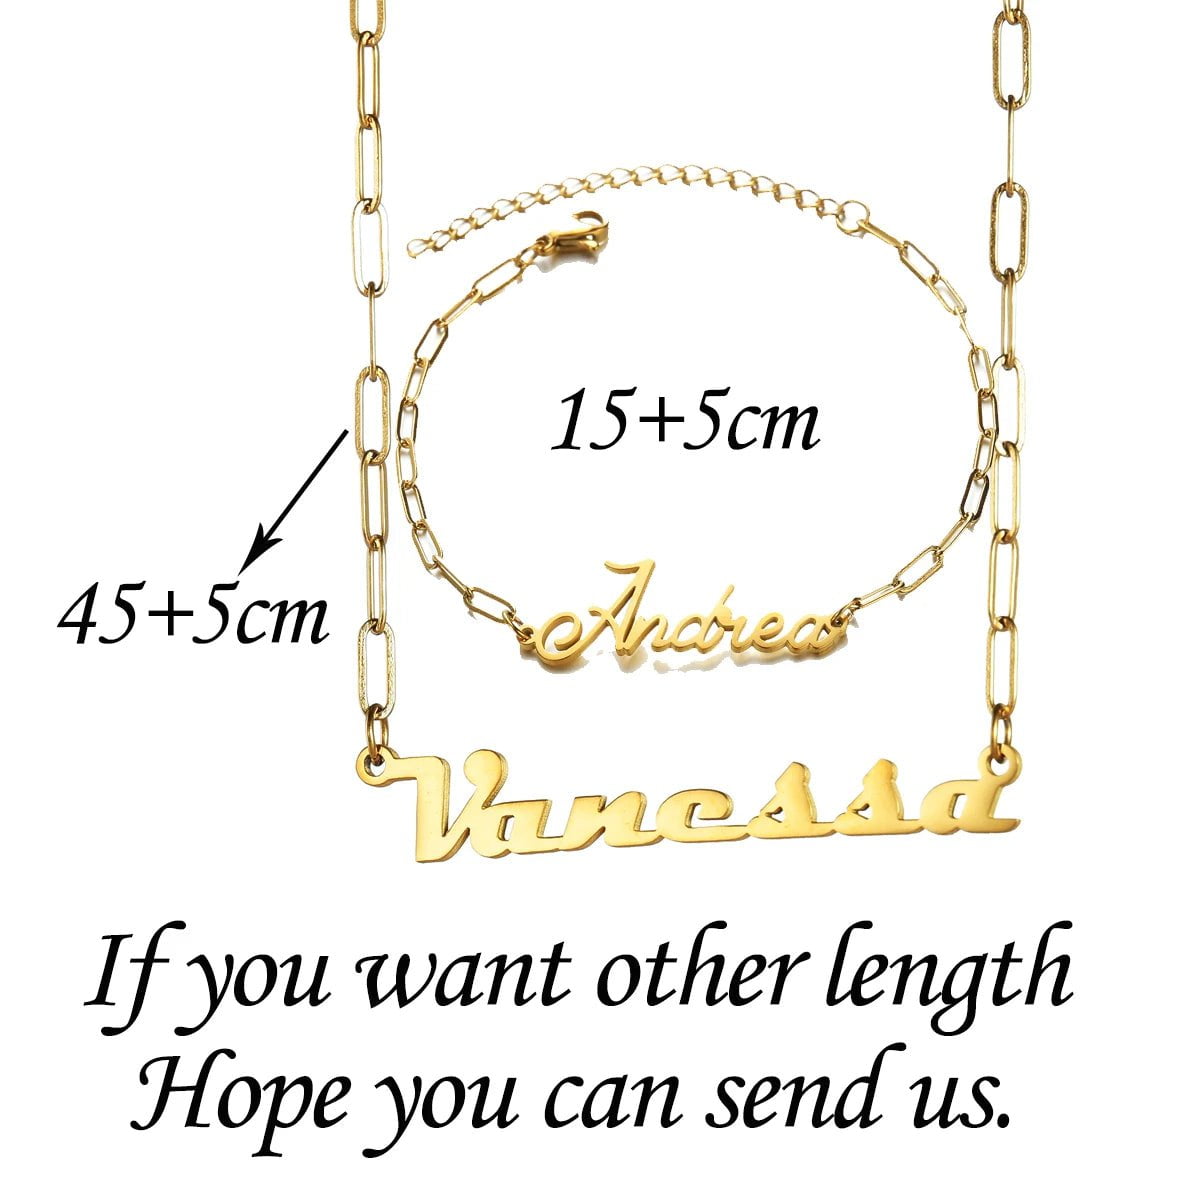 Personalized Custom Name Jewelry Set - Flat Wire Long O Chain Bracelet and Necklace, Stainless Steel for Women